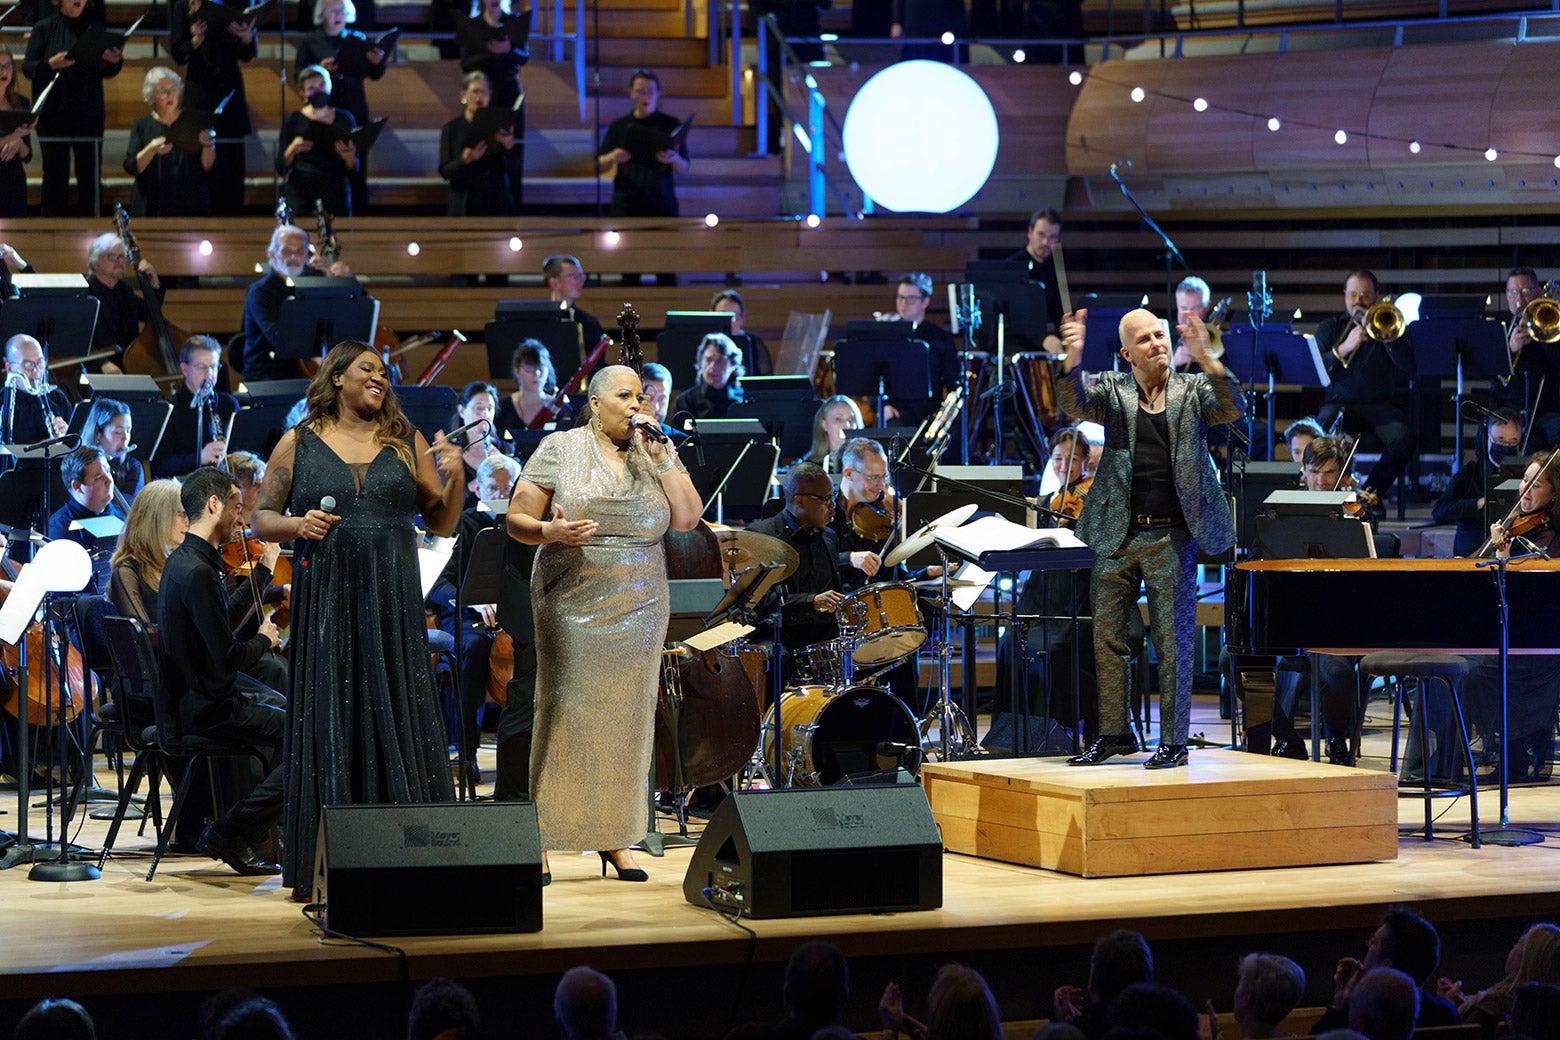 Smiling singers in formalwear and an orchestra, conductor, and white holiday string lights onstage at Canada's Maison Symphonique.